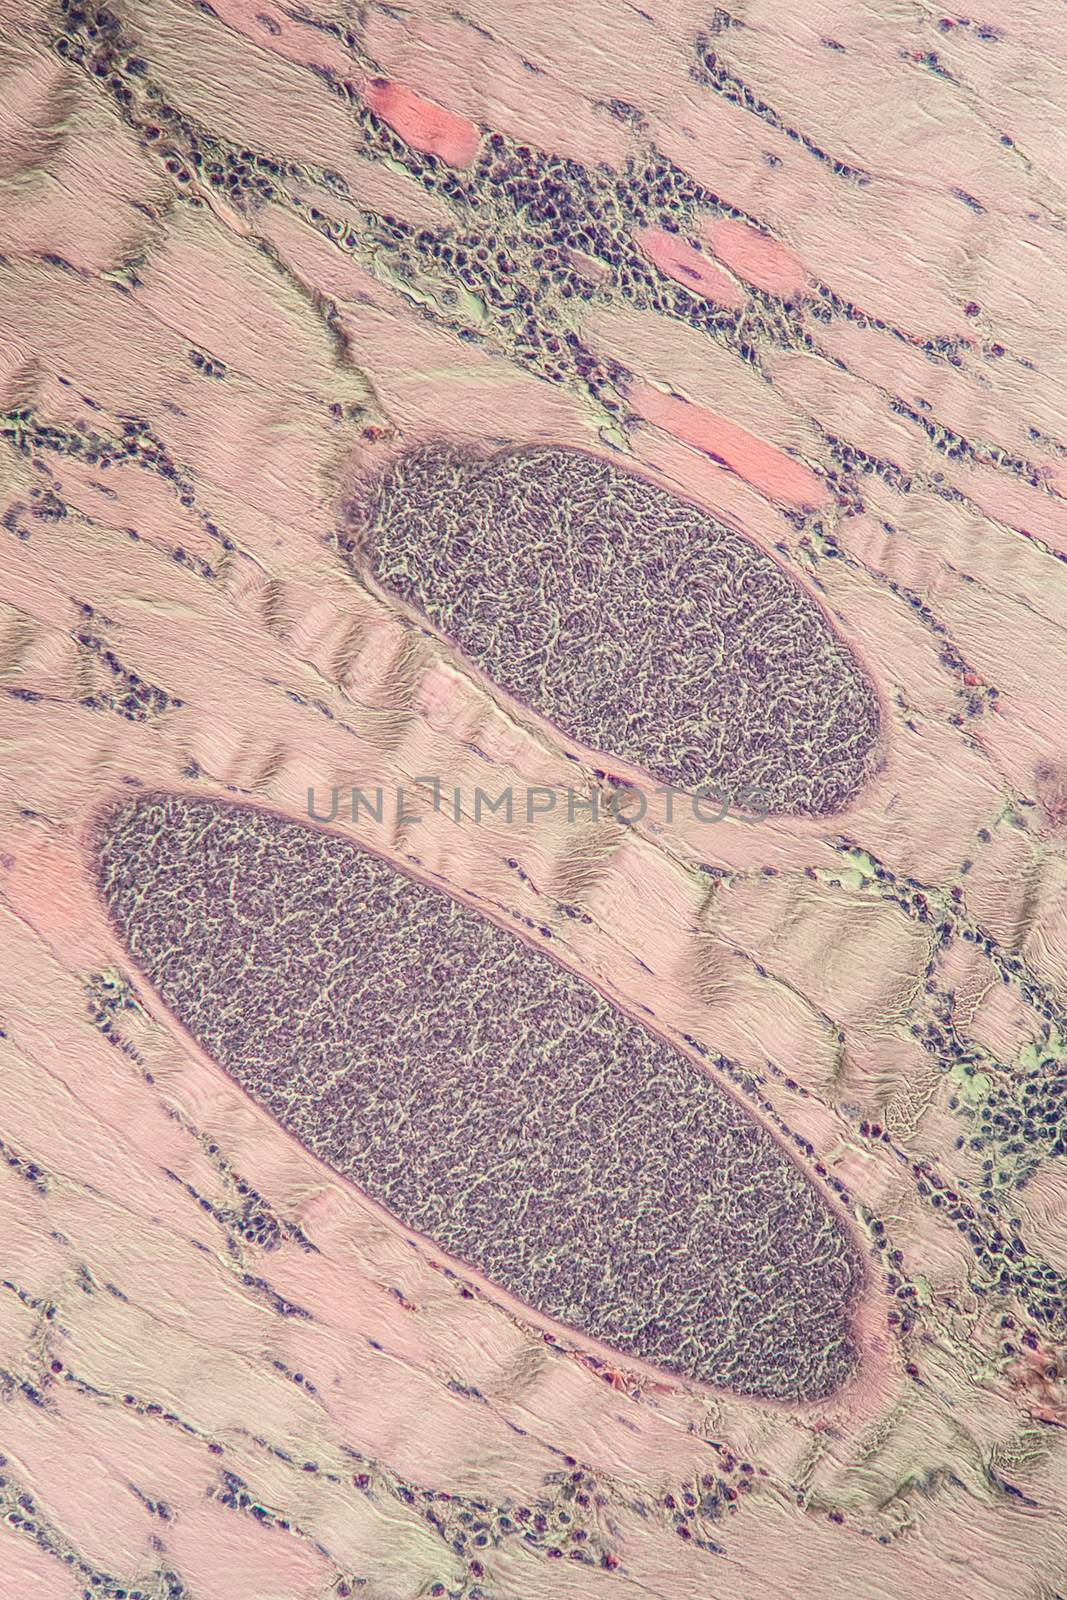 Sarcocystis spore animals in muscle, 200x